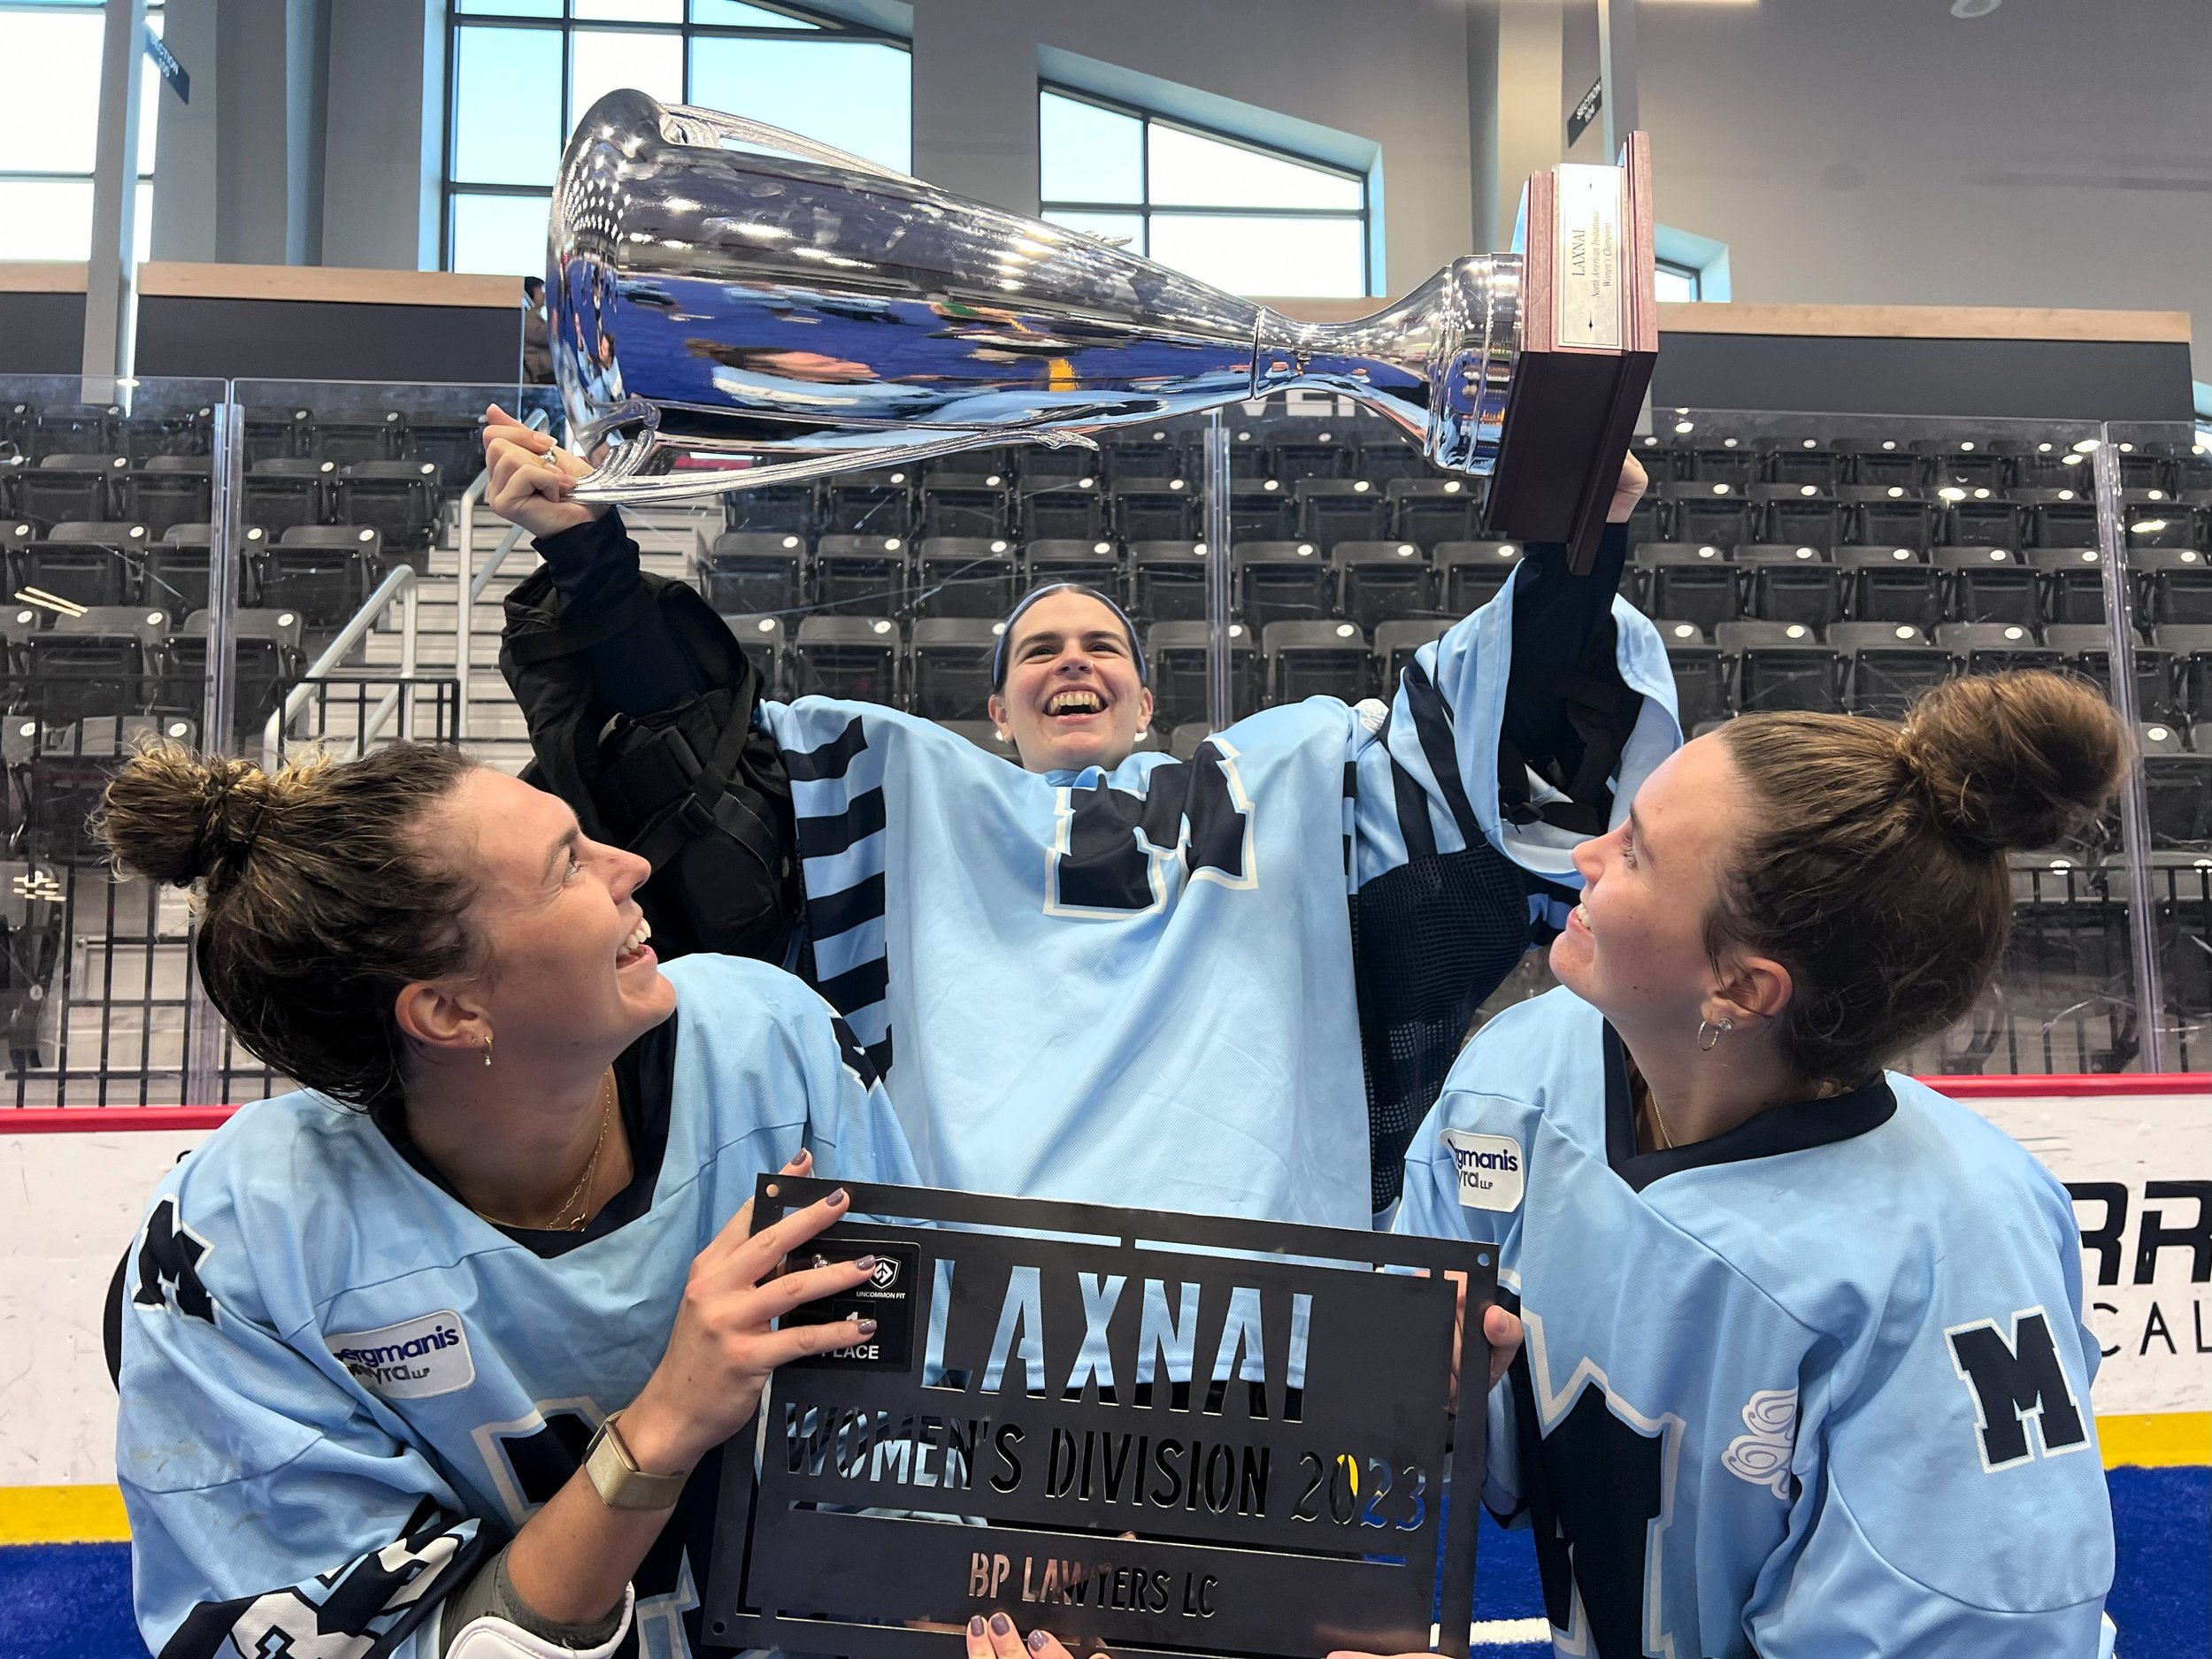 Erica Evans (left), Lou Warner (middle) and Payton Crough (right) celebrating the first-ever LAXNAI Women's tournament. All photos by David Tuan Bui. 